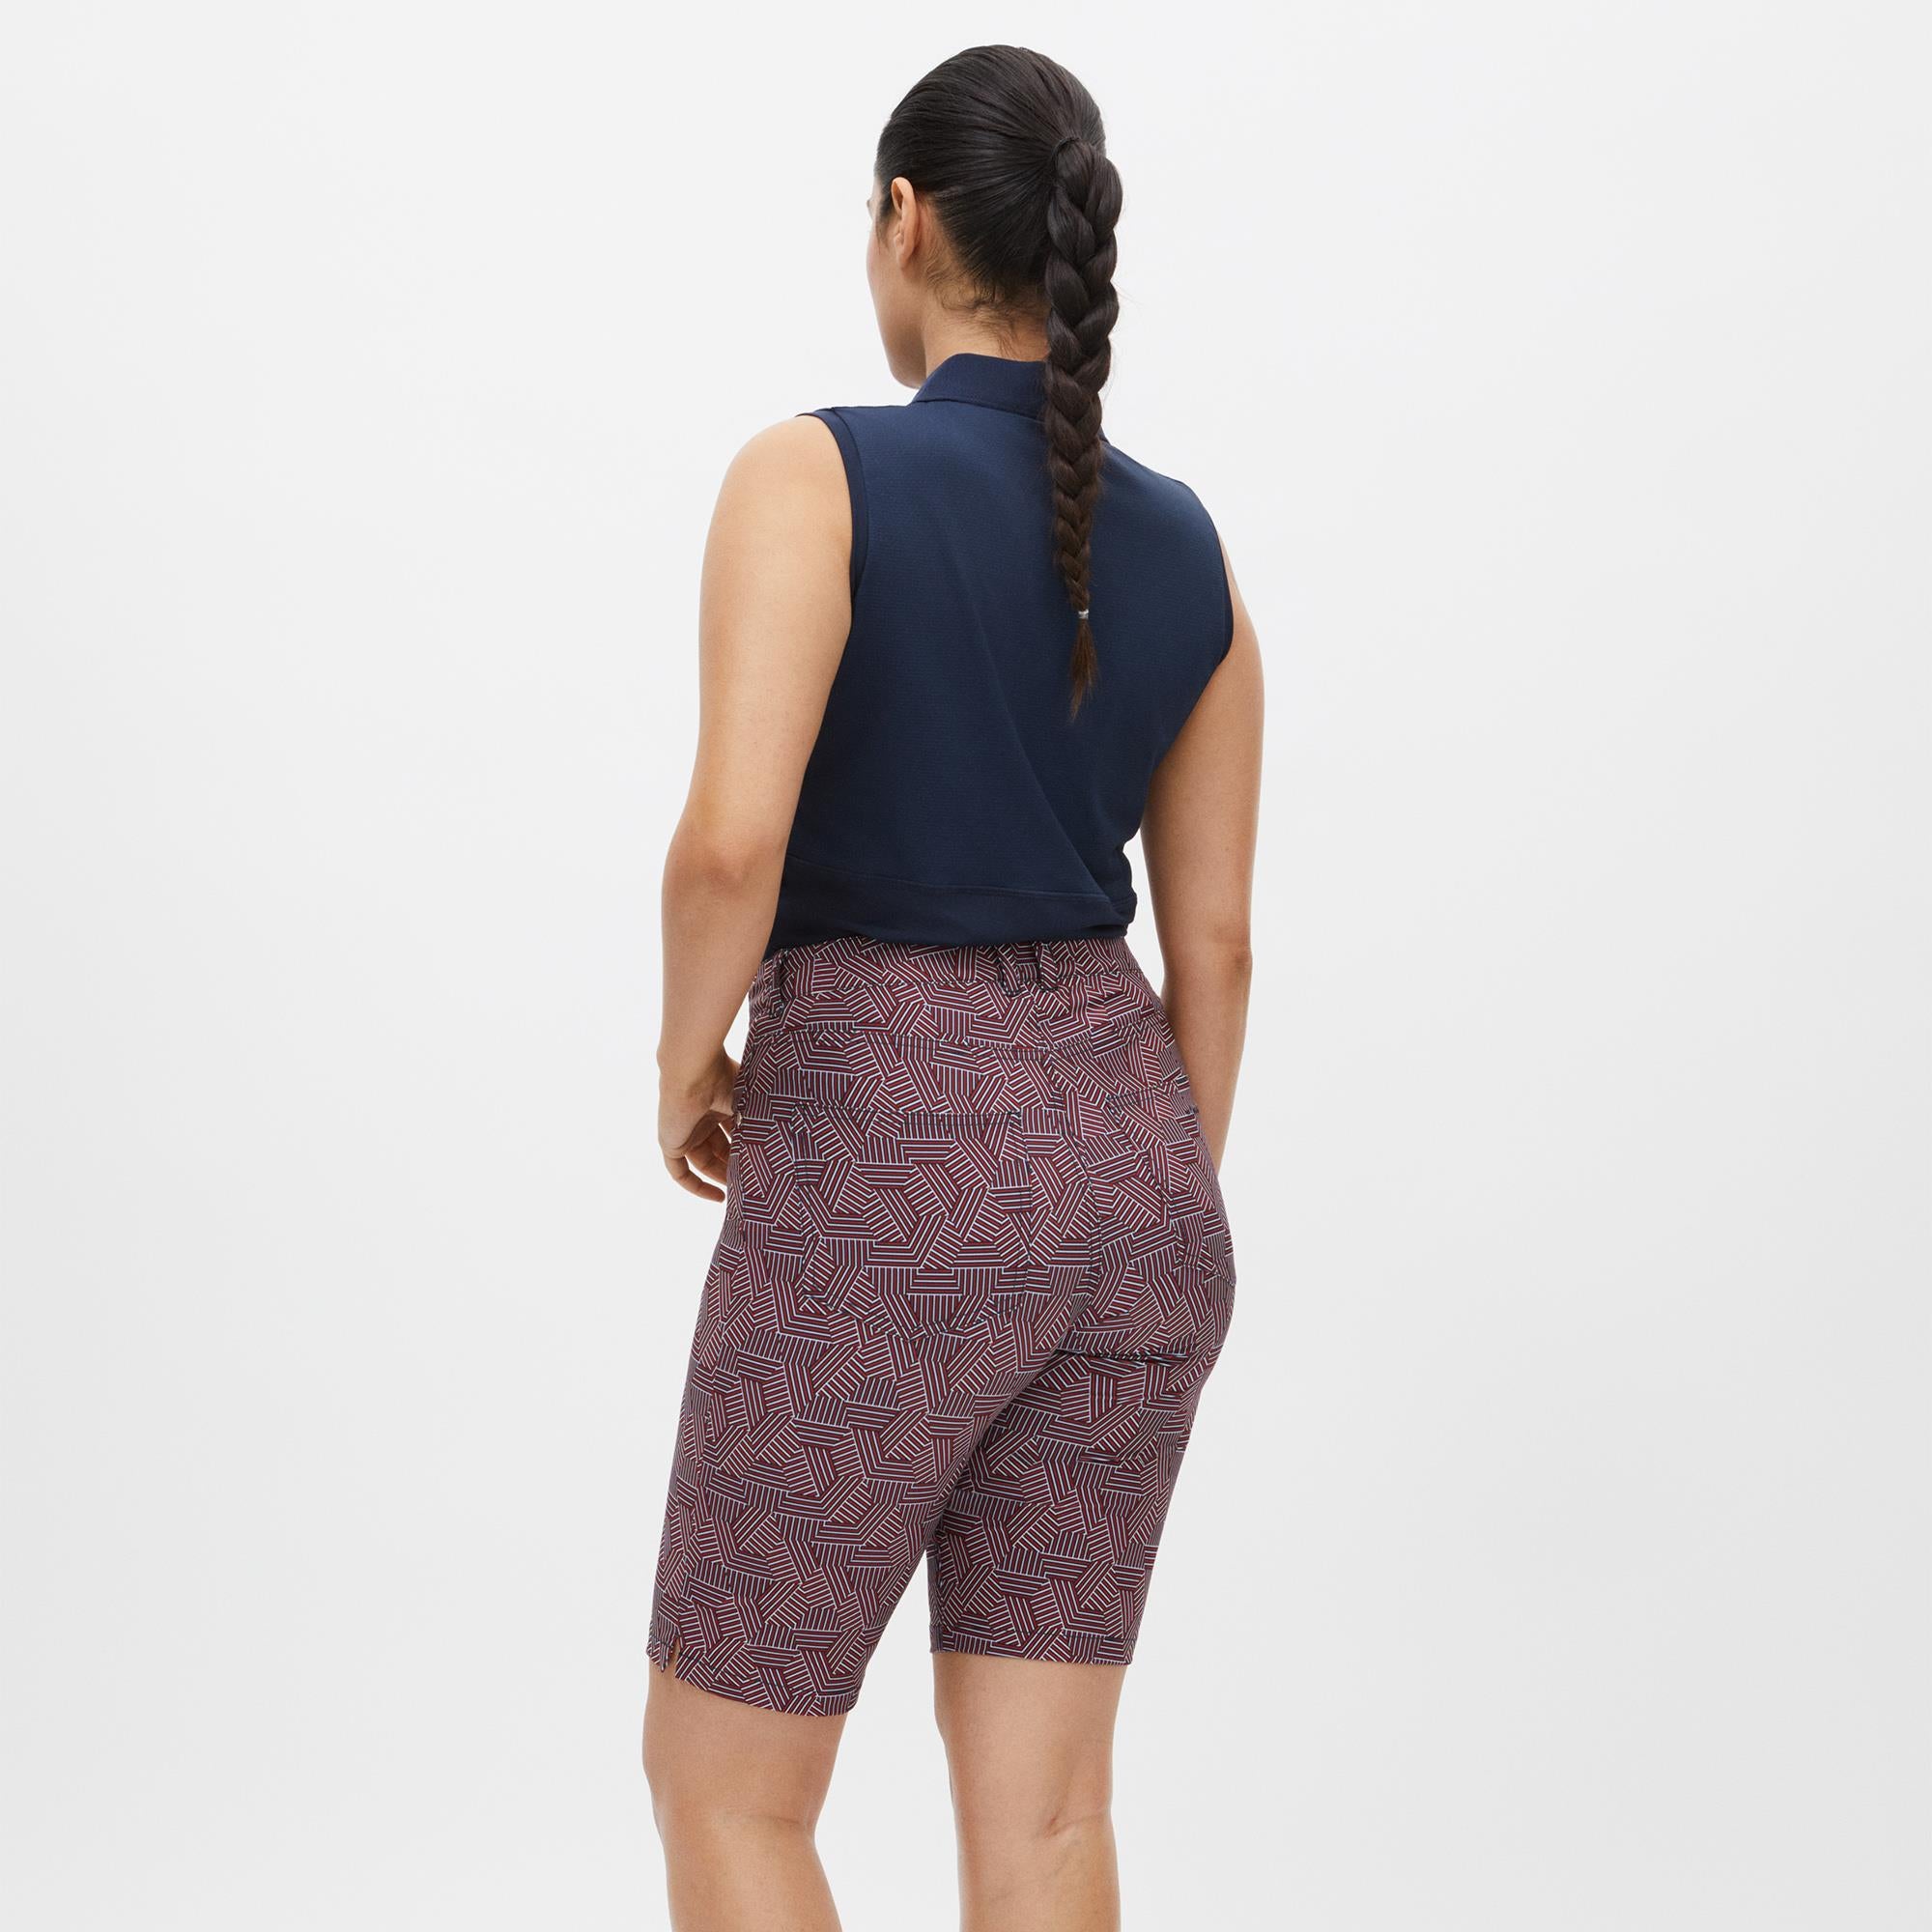 Women's Shorts – Stretch Is Comfort